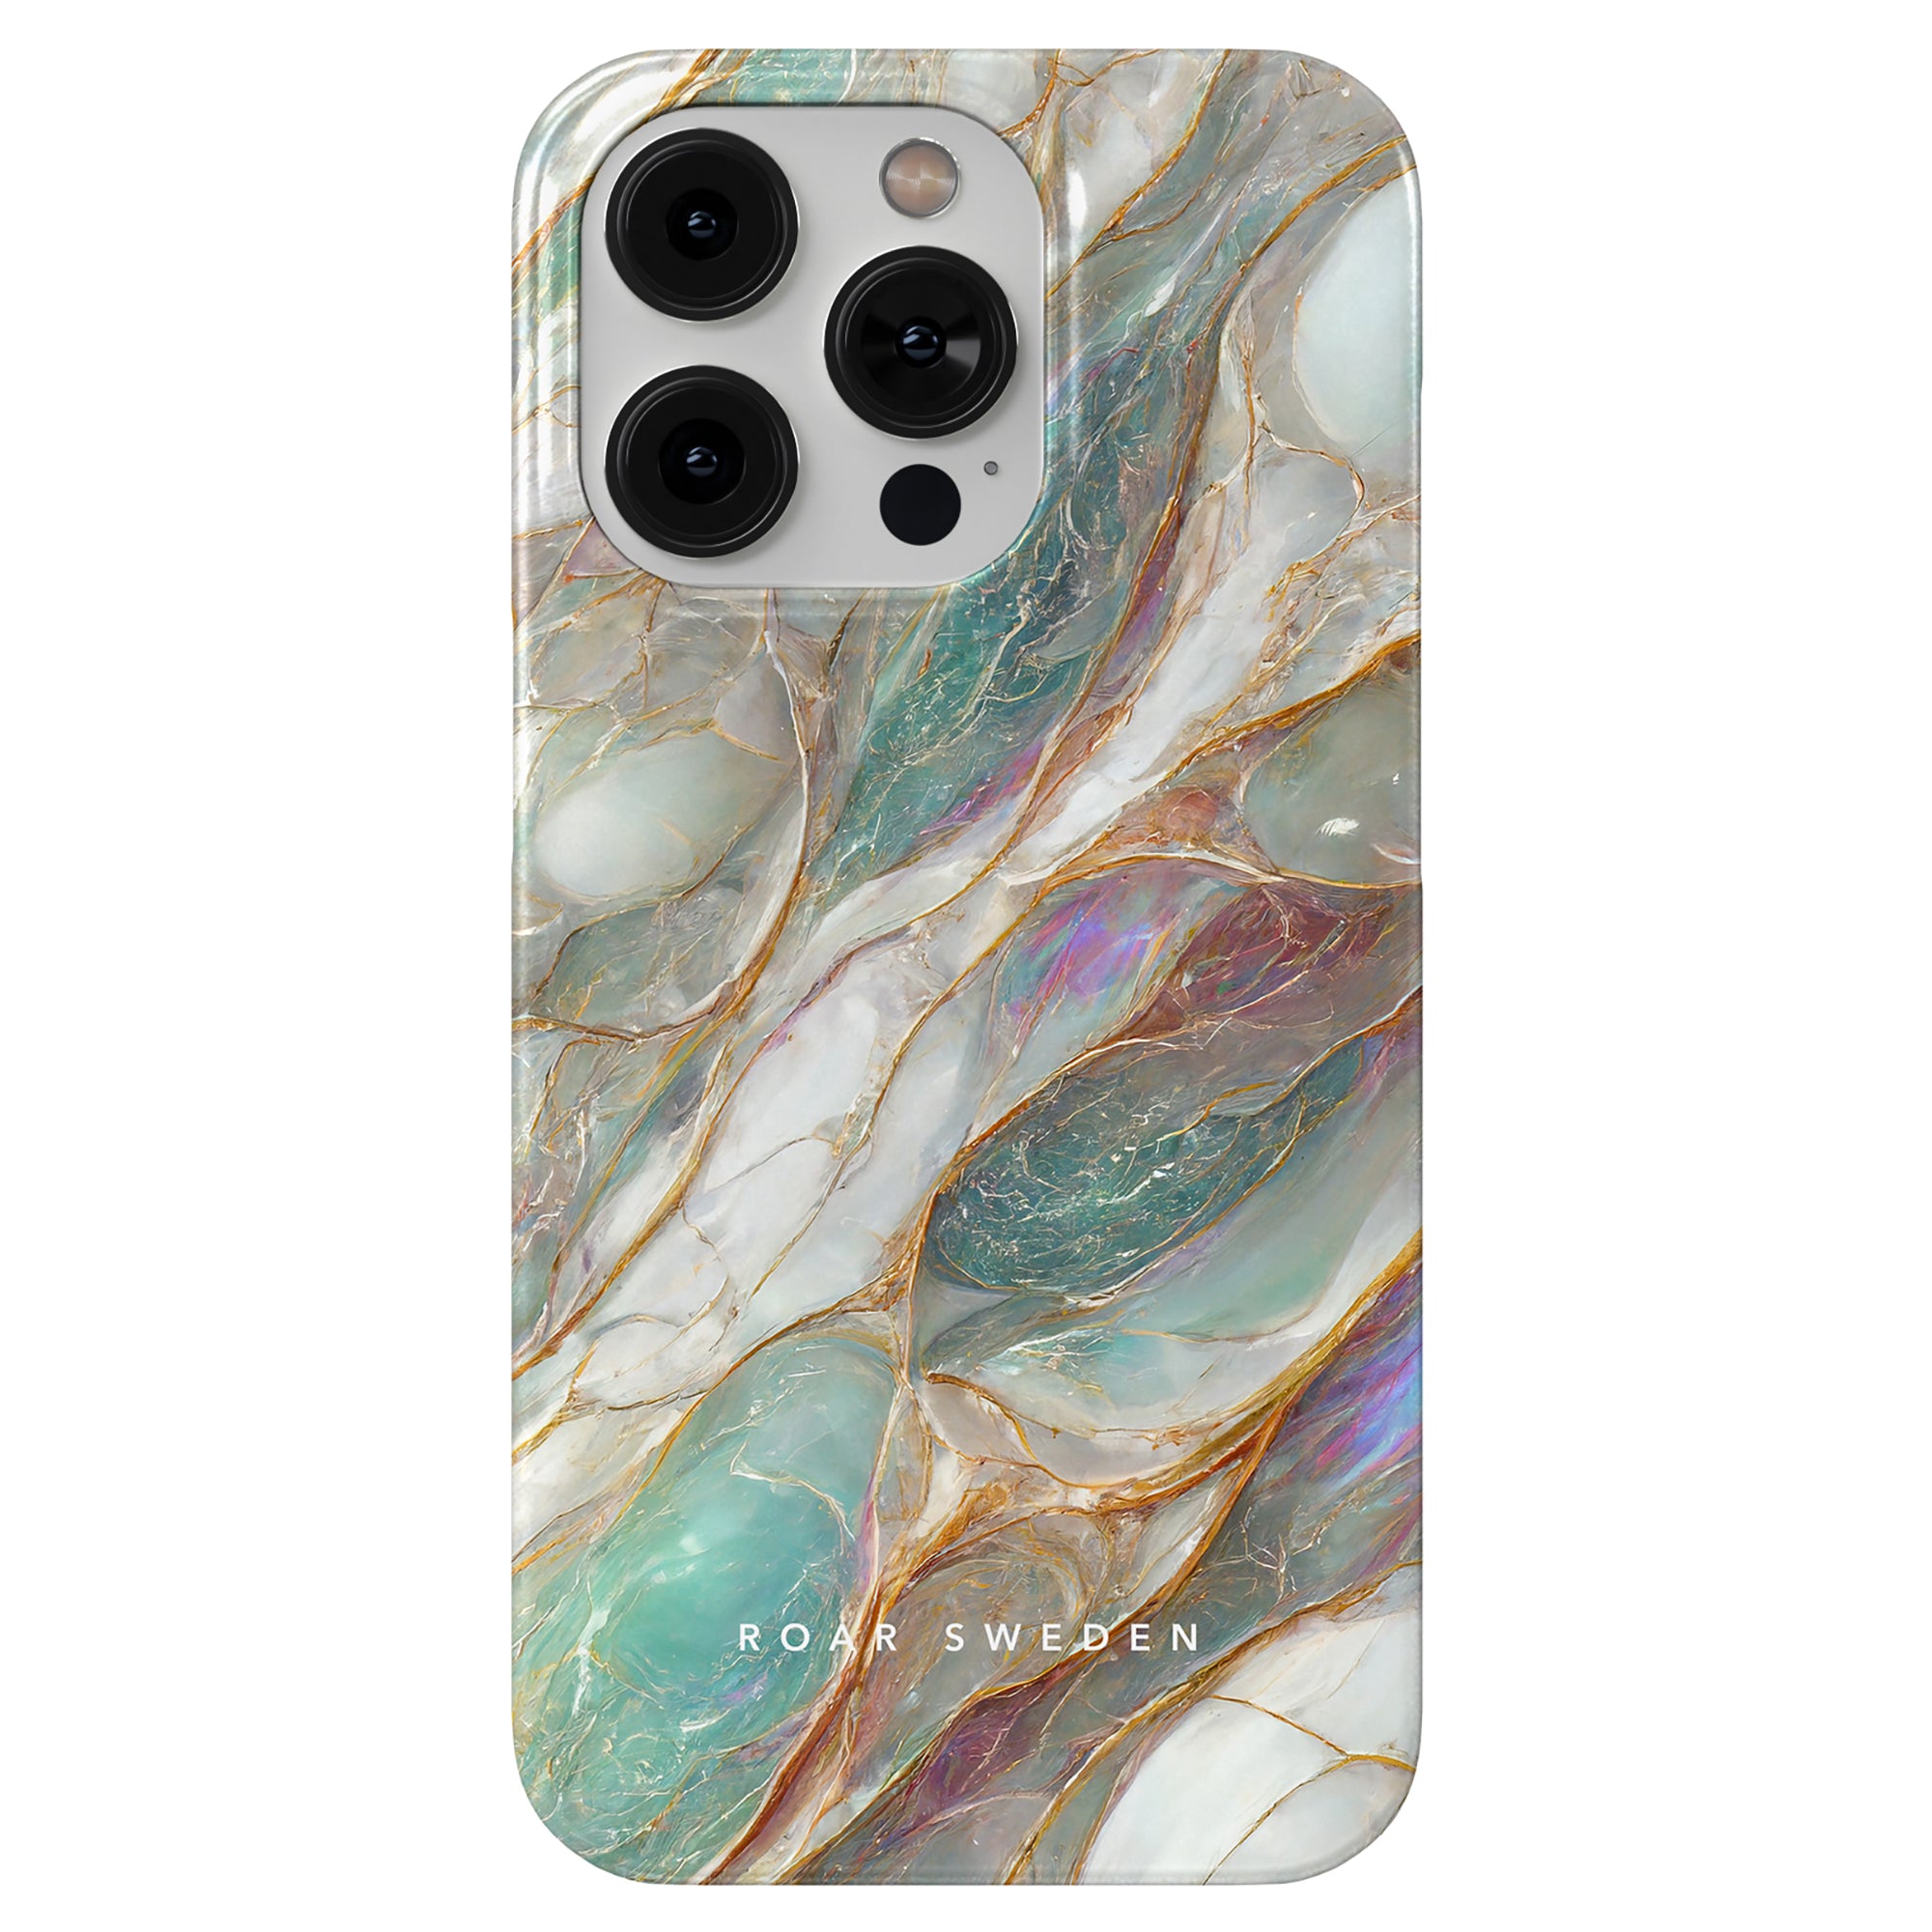 A Mother of Pearl slim case with multiple cameras.